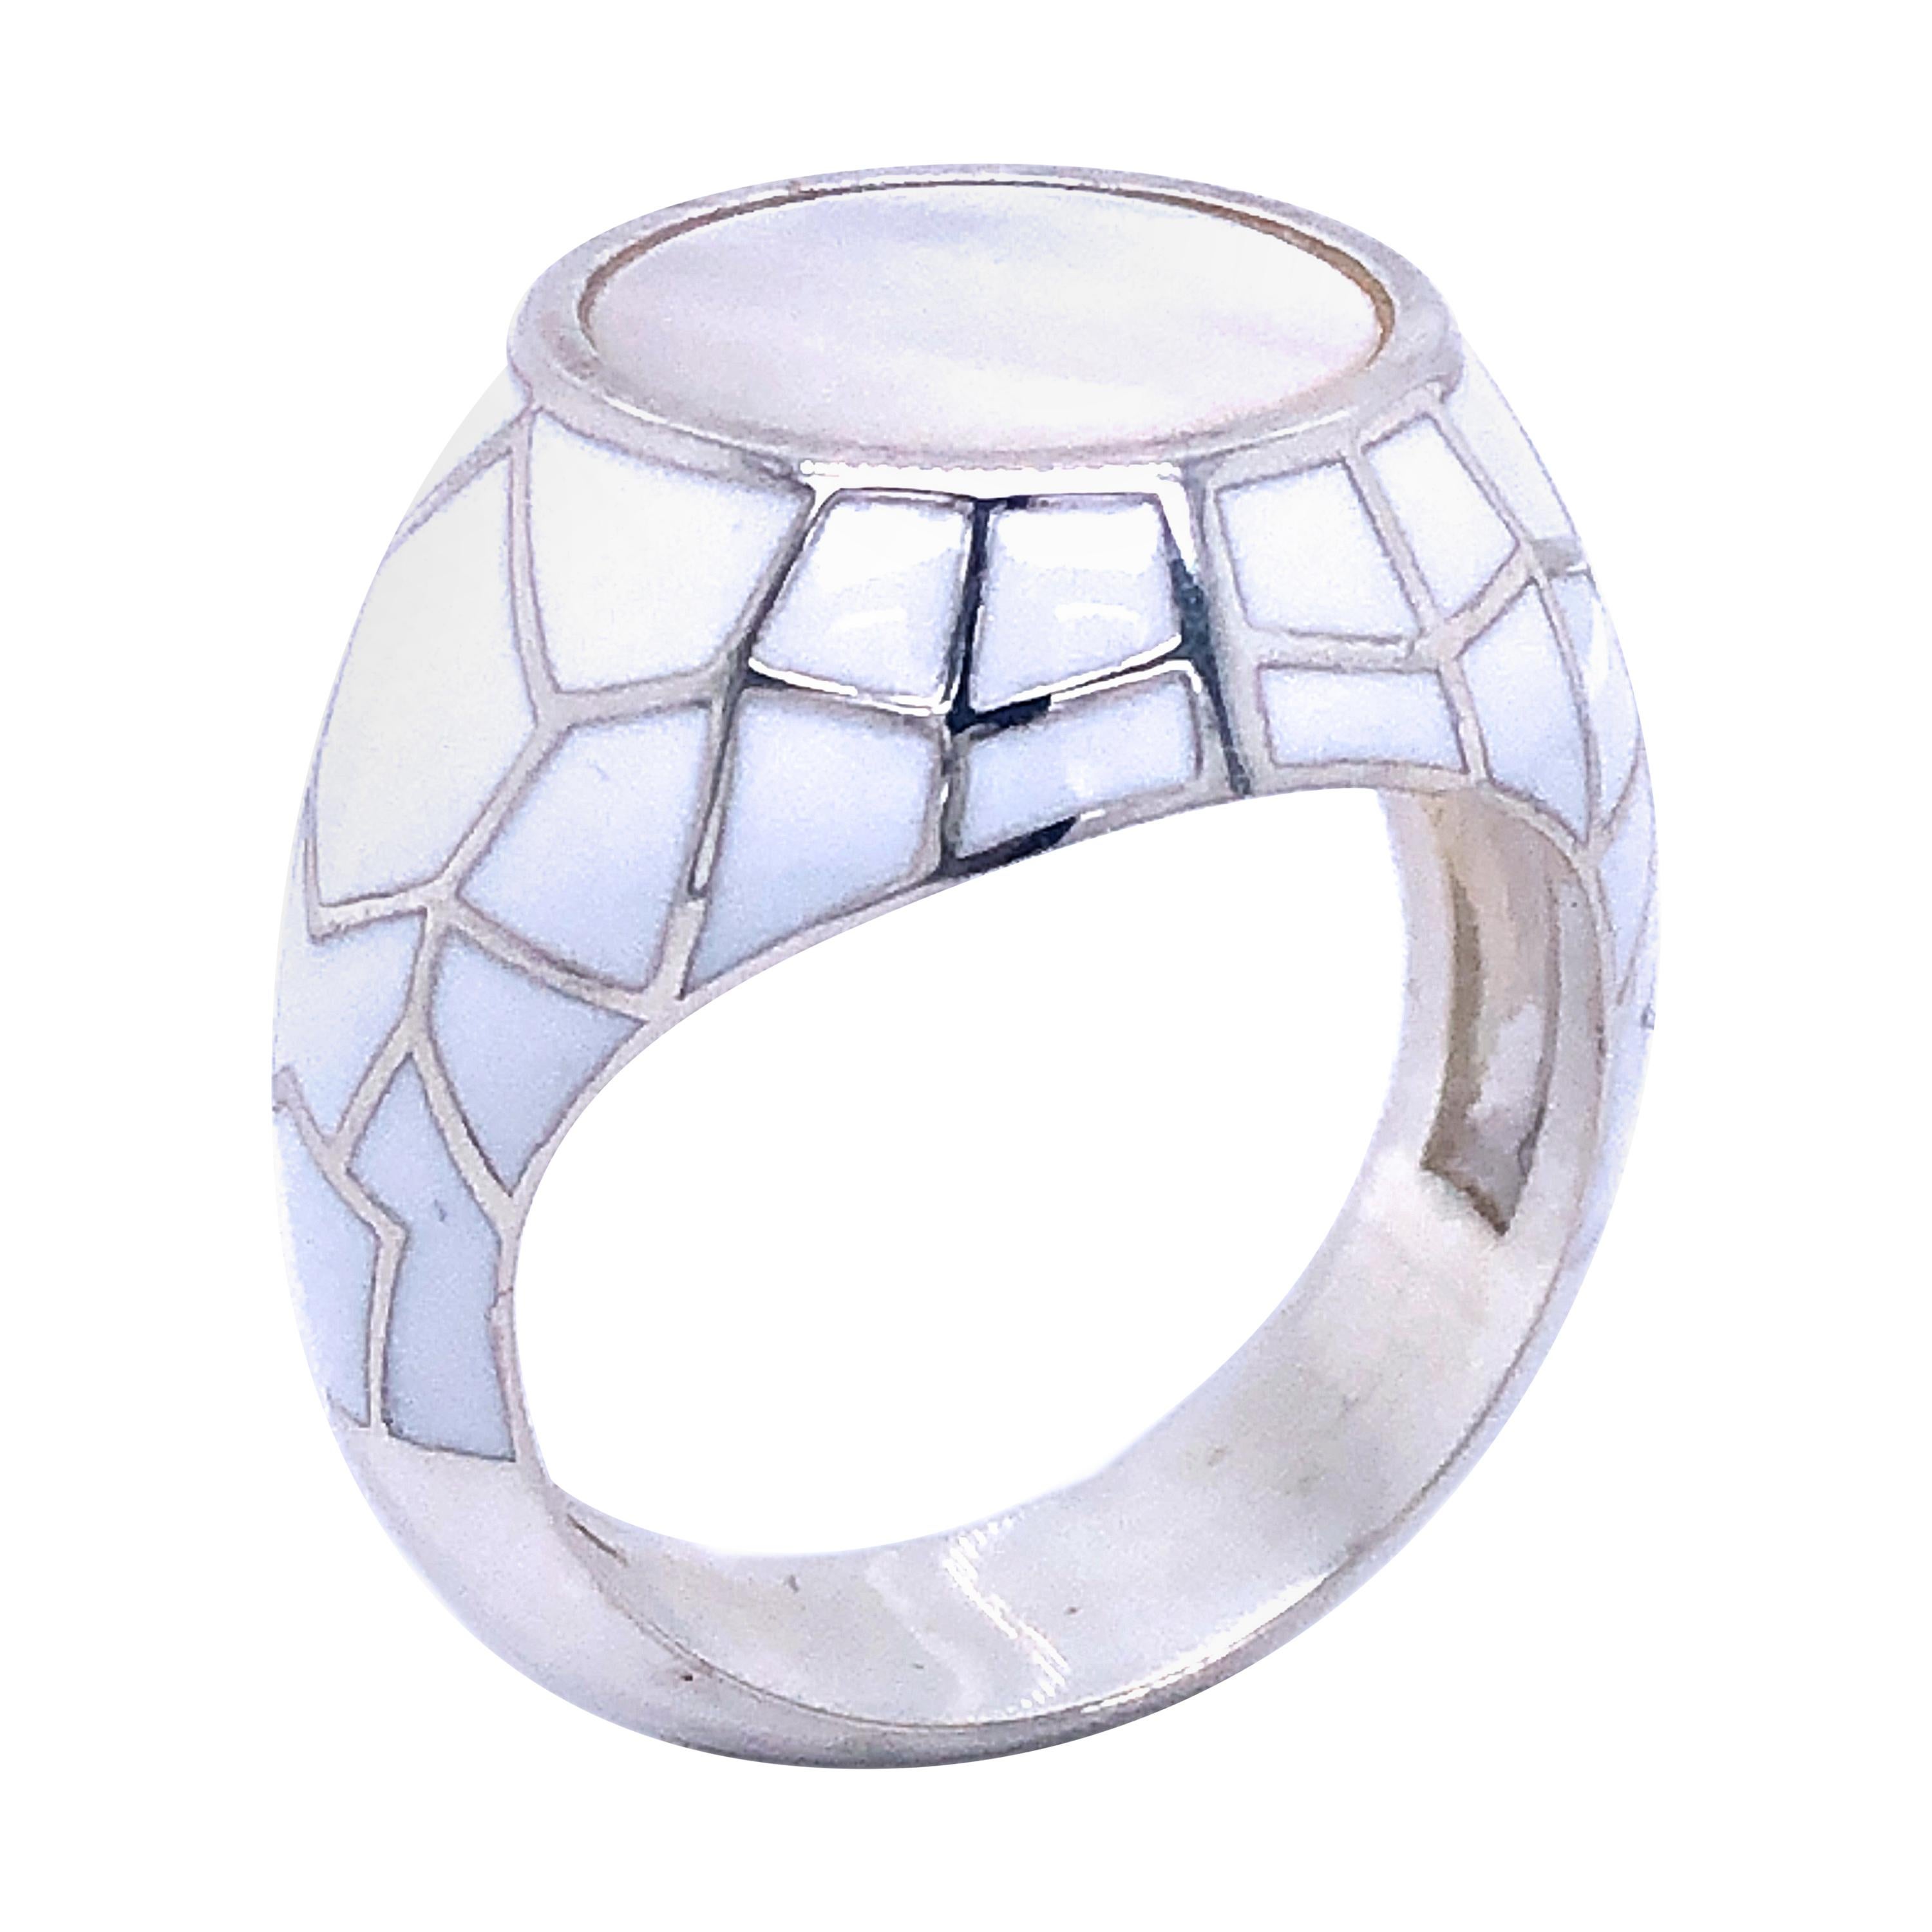 Berca White Enameled Disk, White Spiderweb Sterling Silver Cocktail Ring